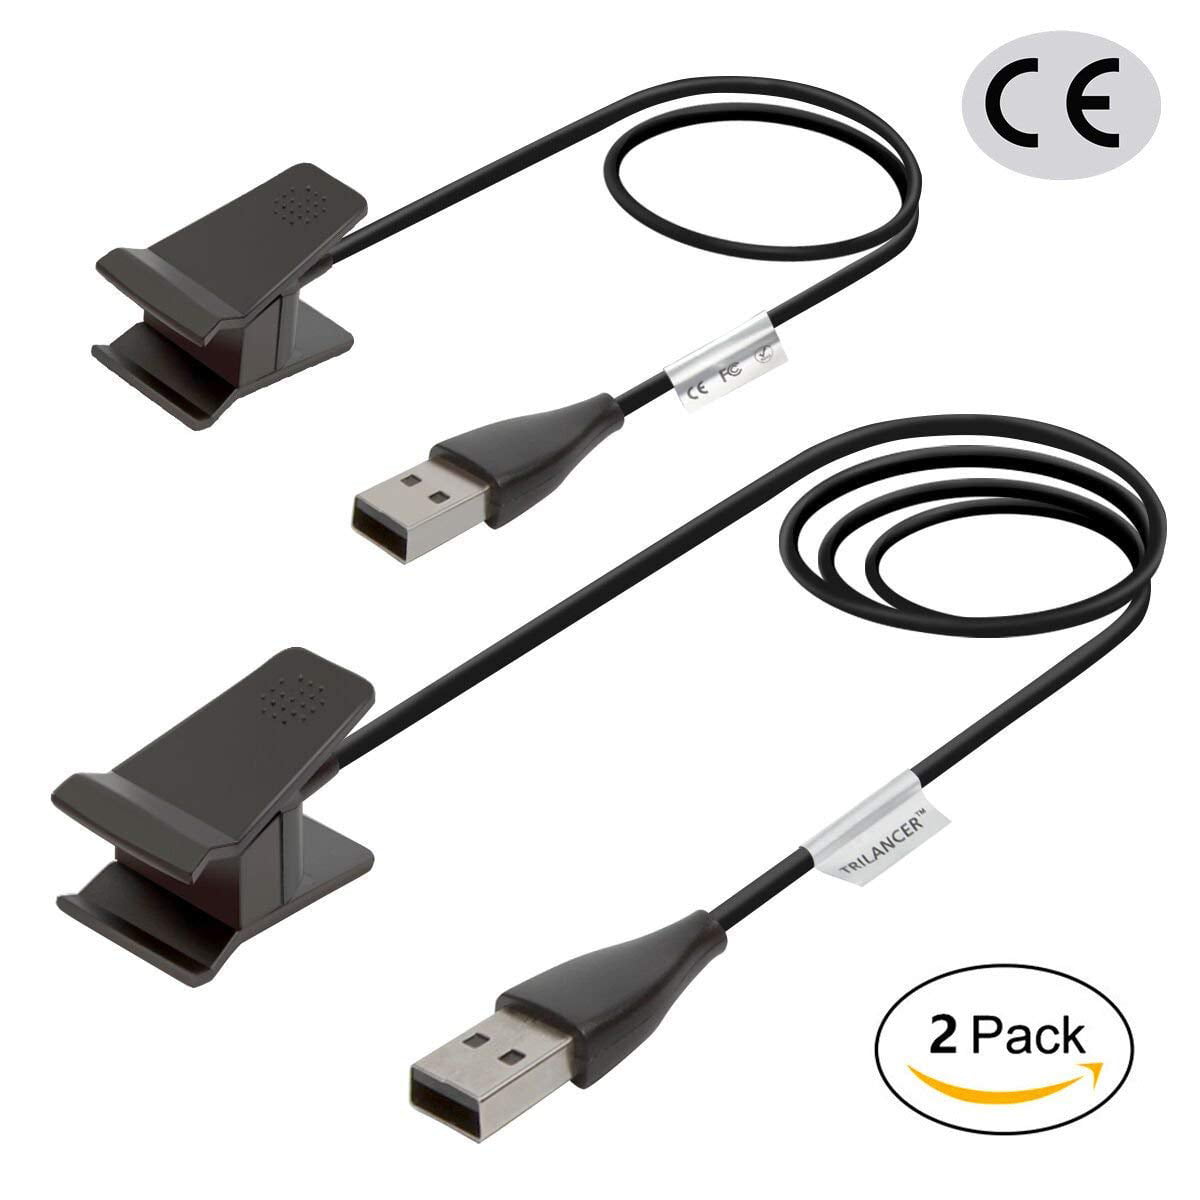 2 Pack/Replacement USB Charger Charging Cable for Fitbit Surge Seller 